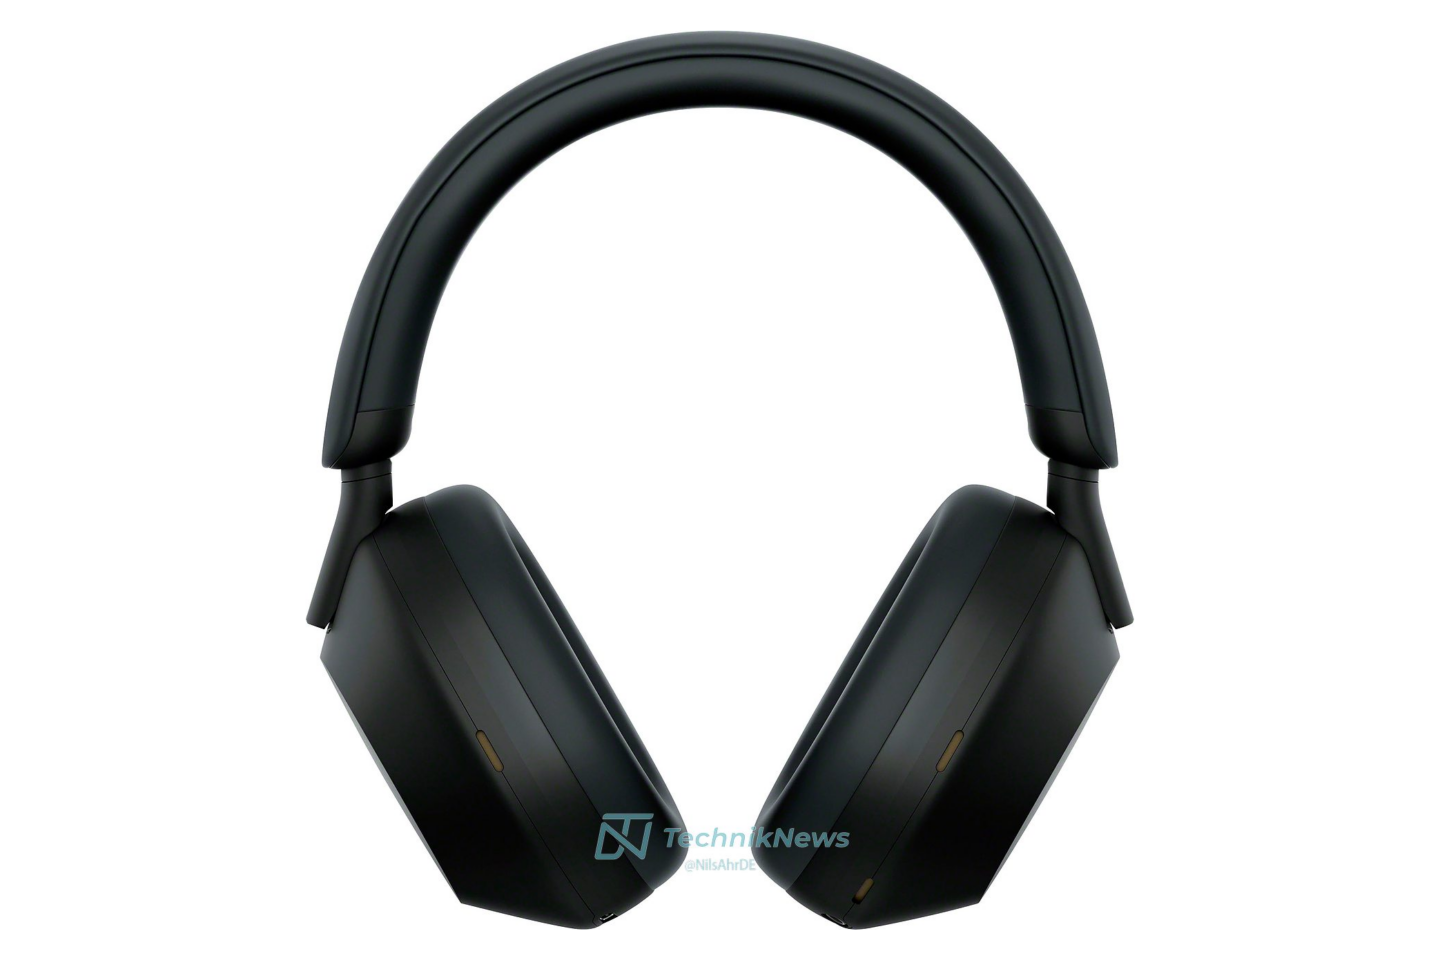 The flagship Sony WH-1000XM5 headphones will get a new design